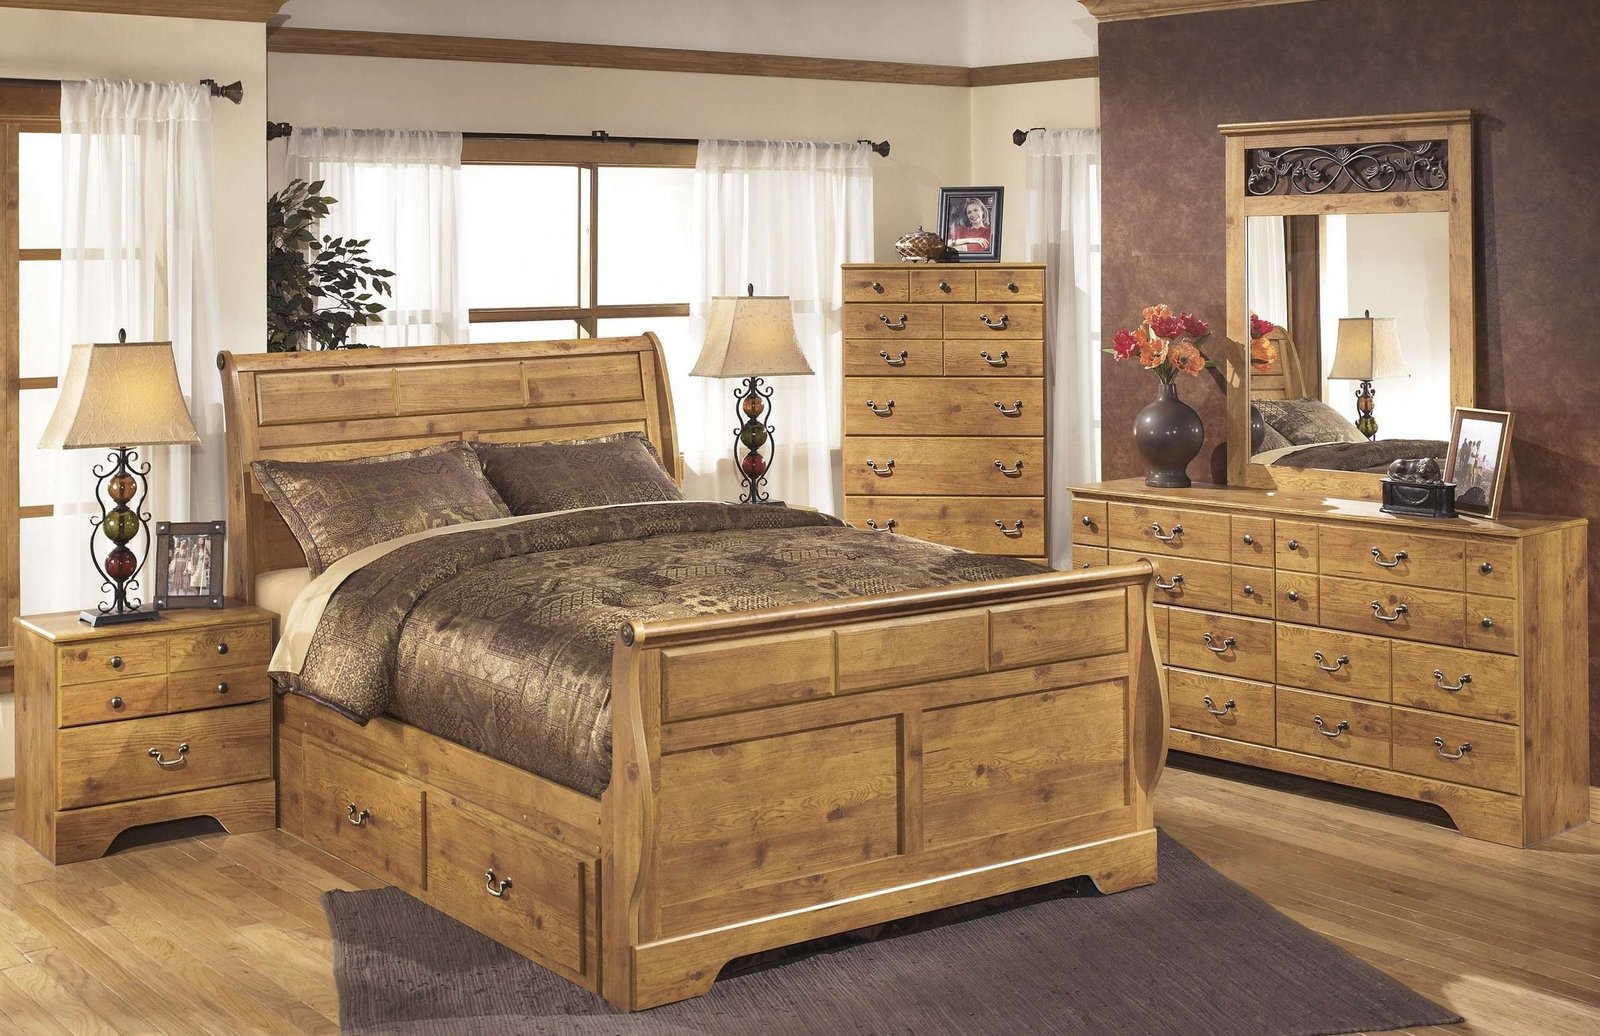 Benefits Of Choosing Oak Furniture Essex For Your Home